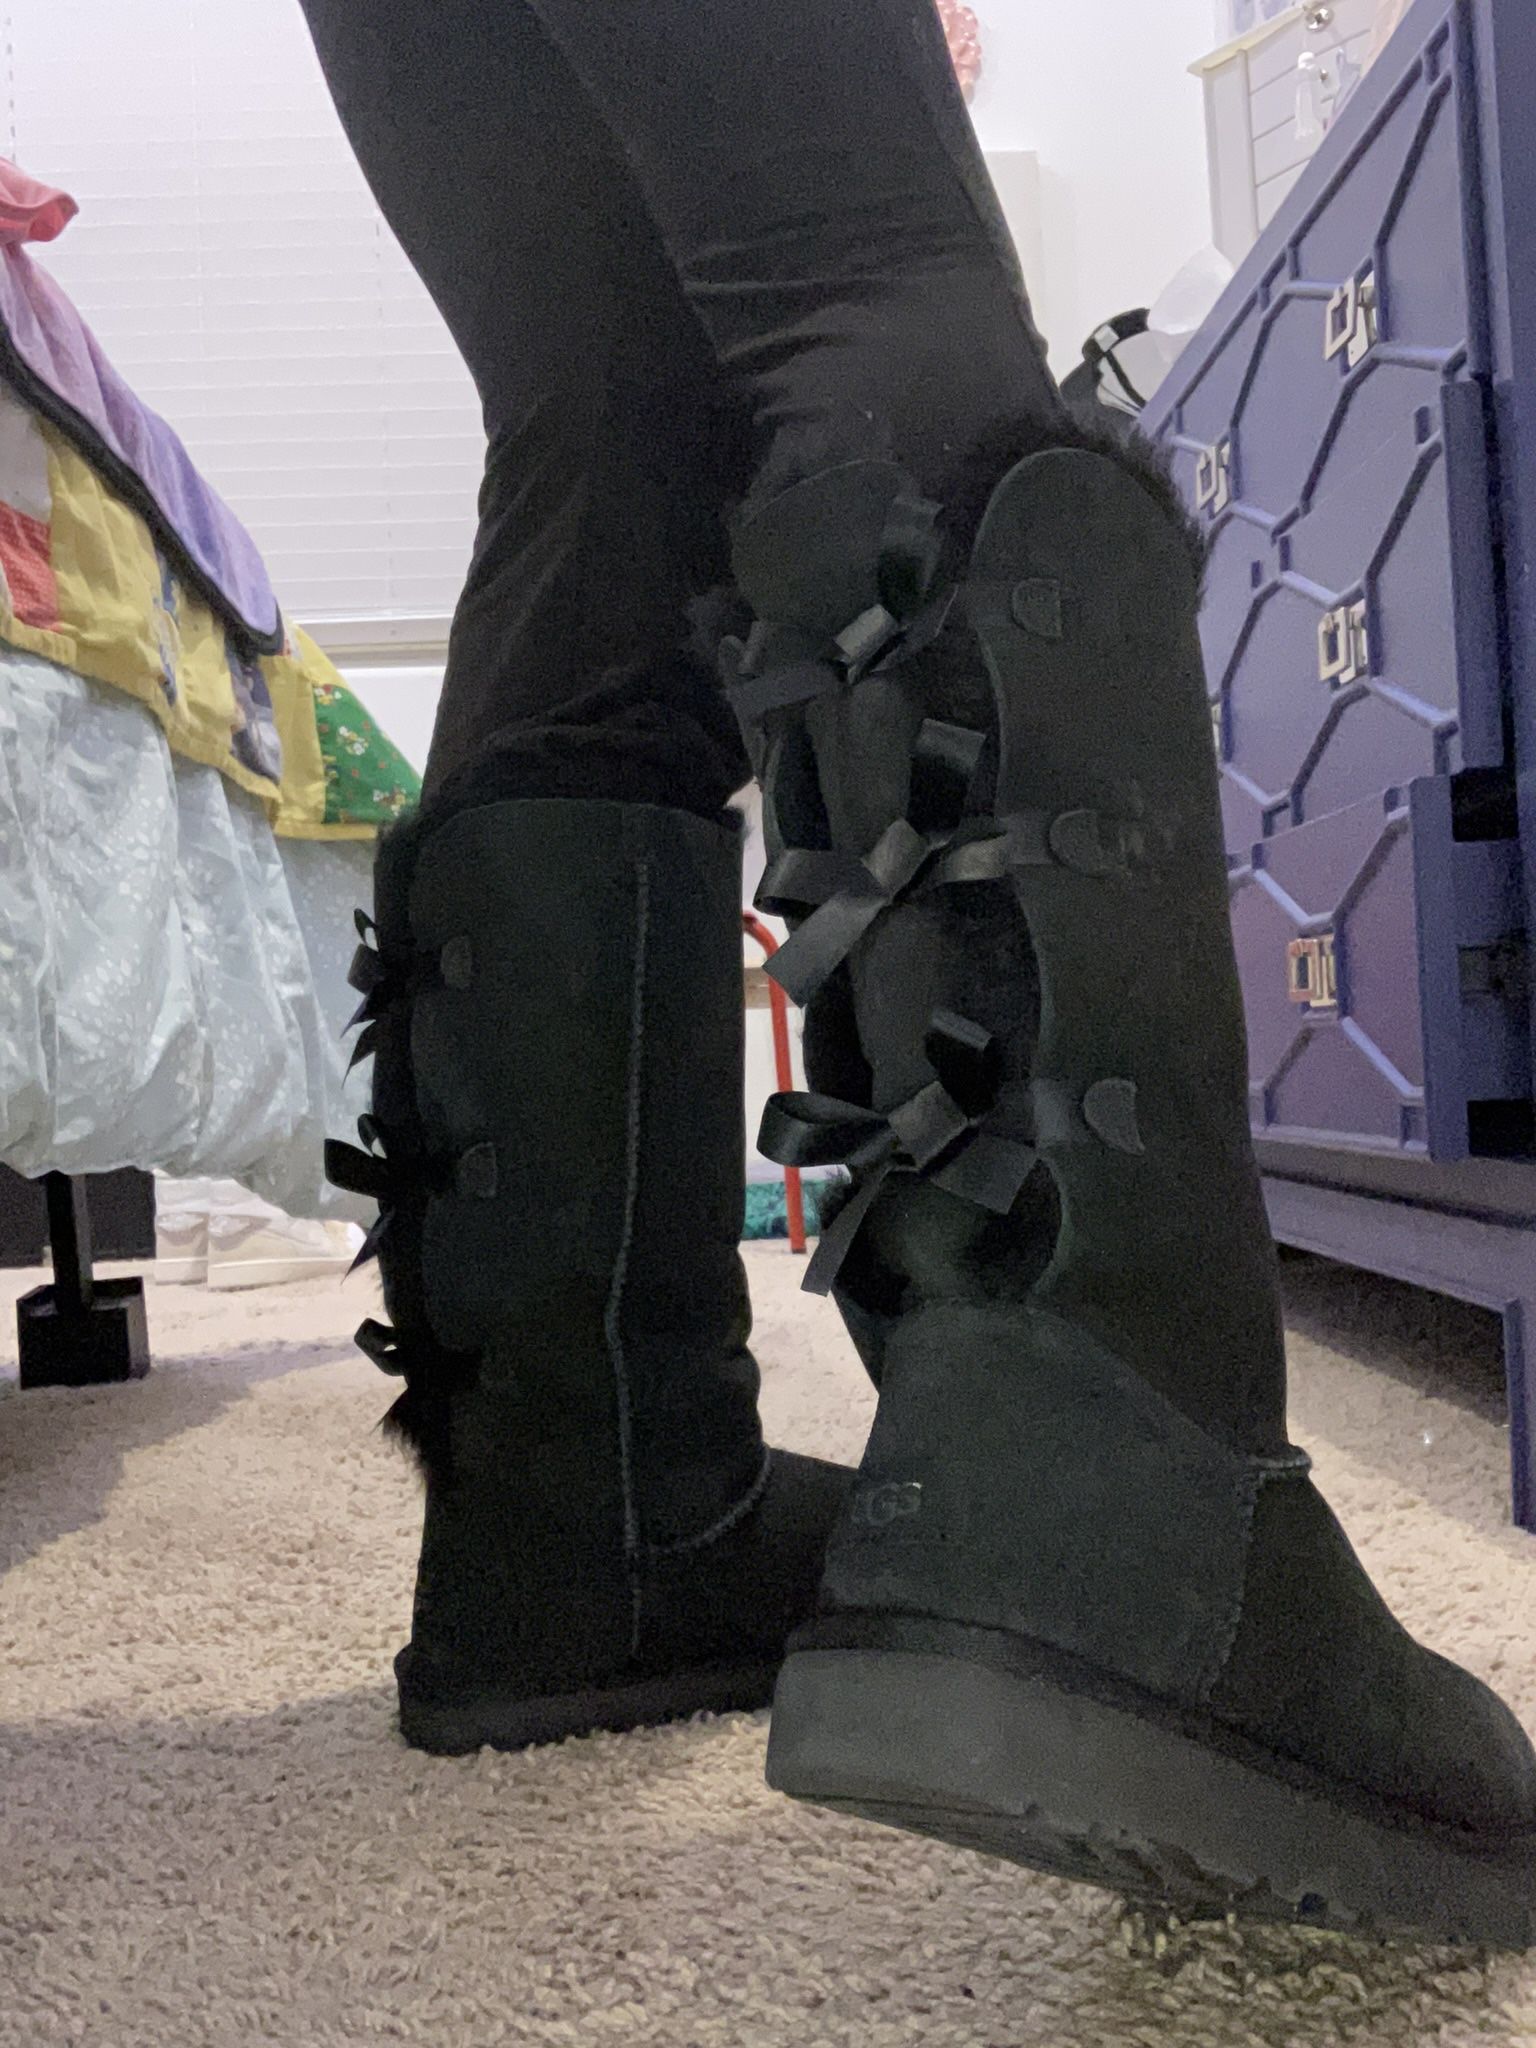 Black Ugg Boots, Tall With Bows Size 10